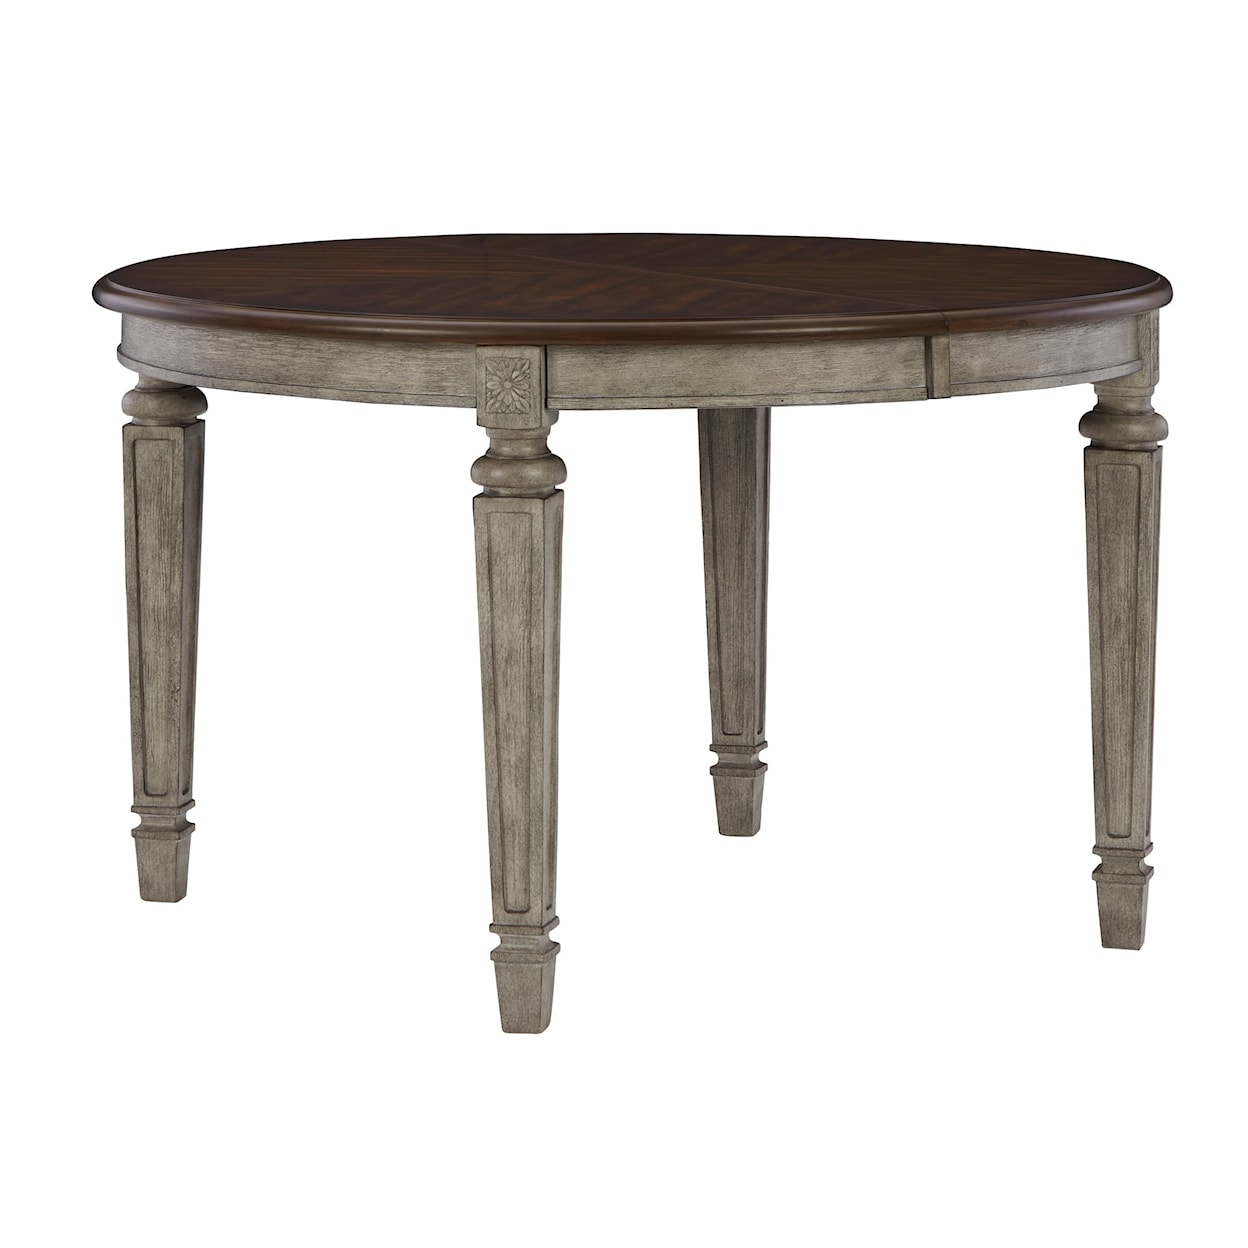 Signature Design by Ashley Lodenbay Dining Table